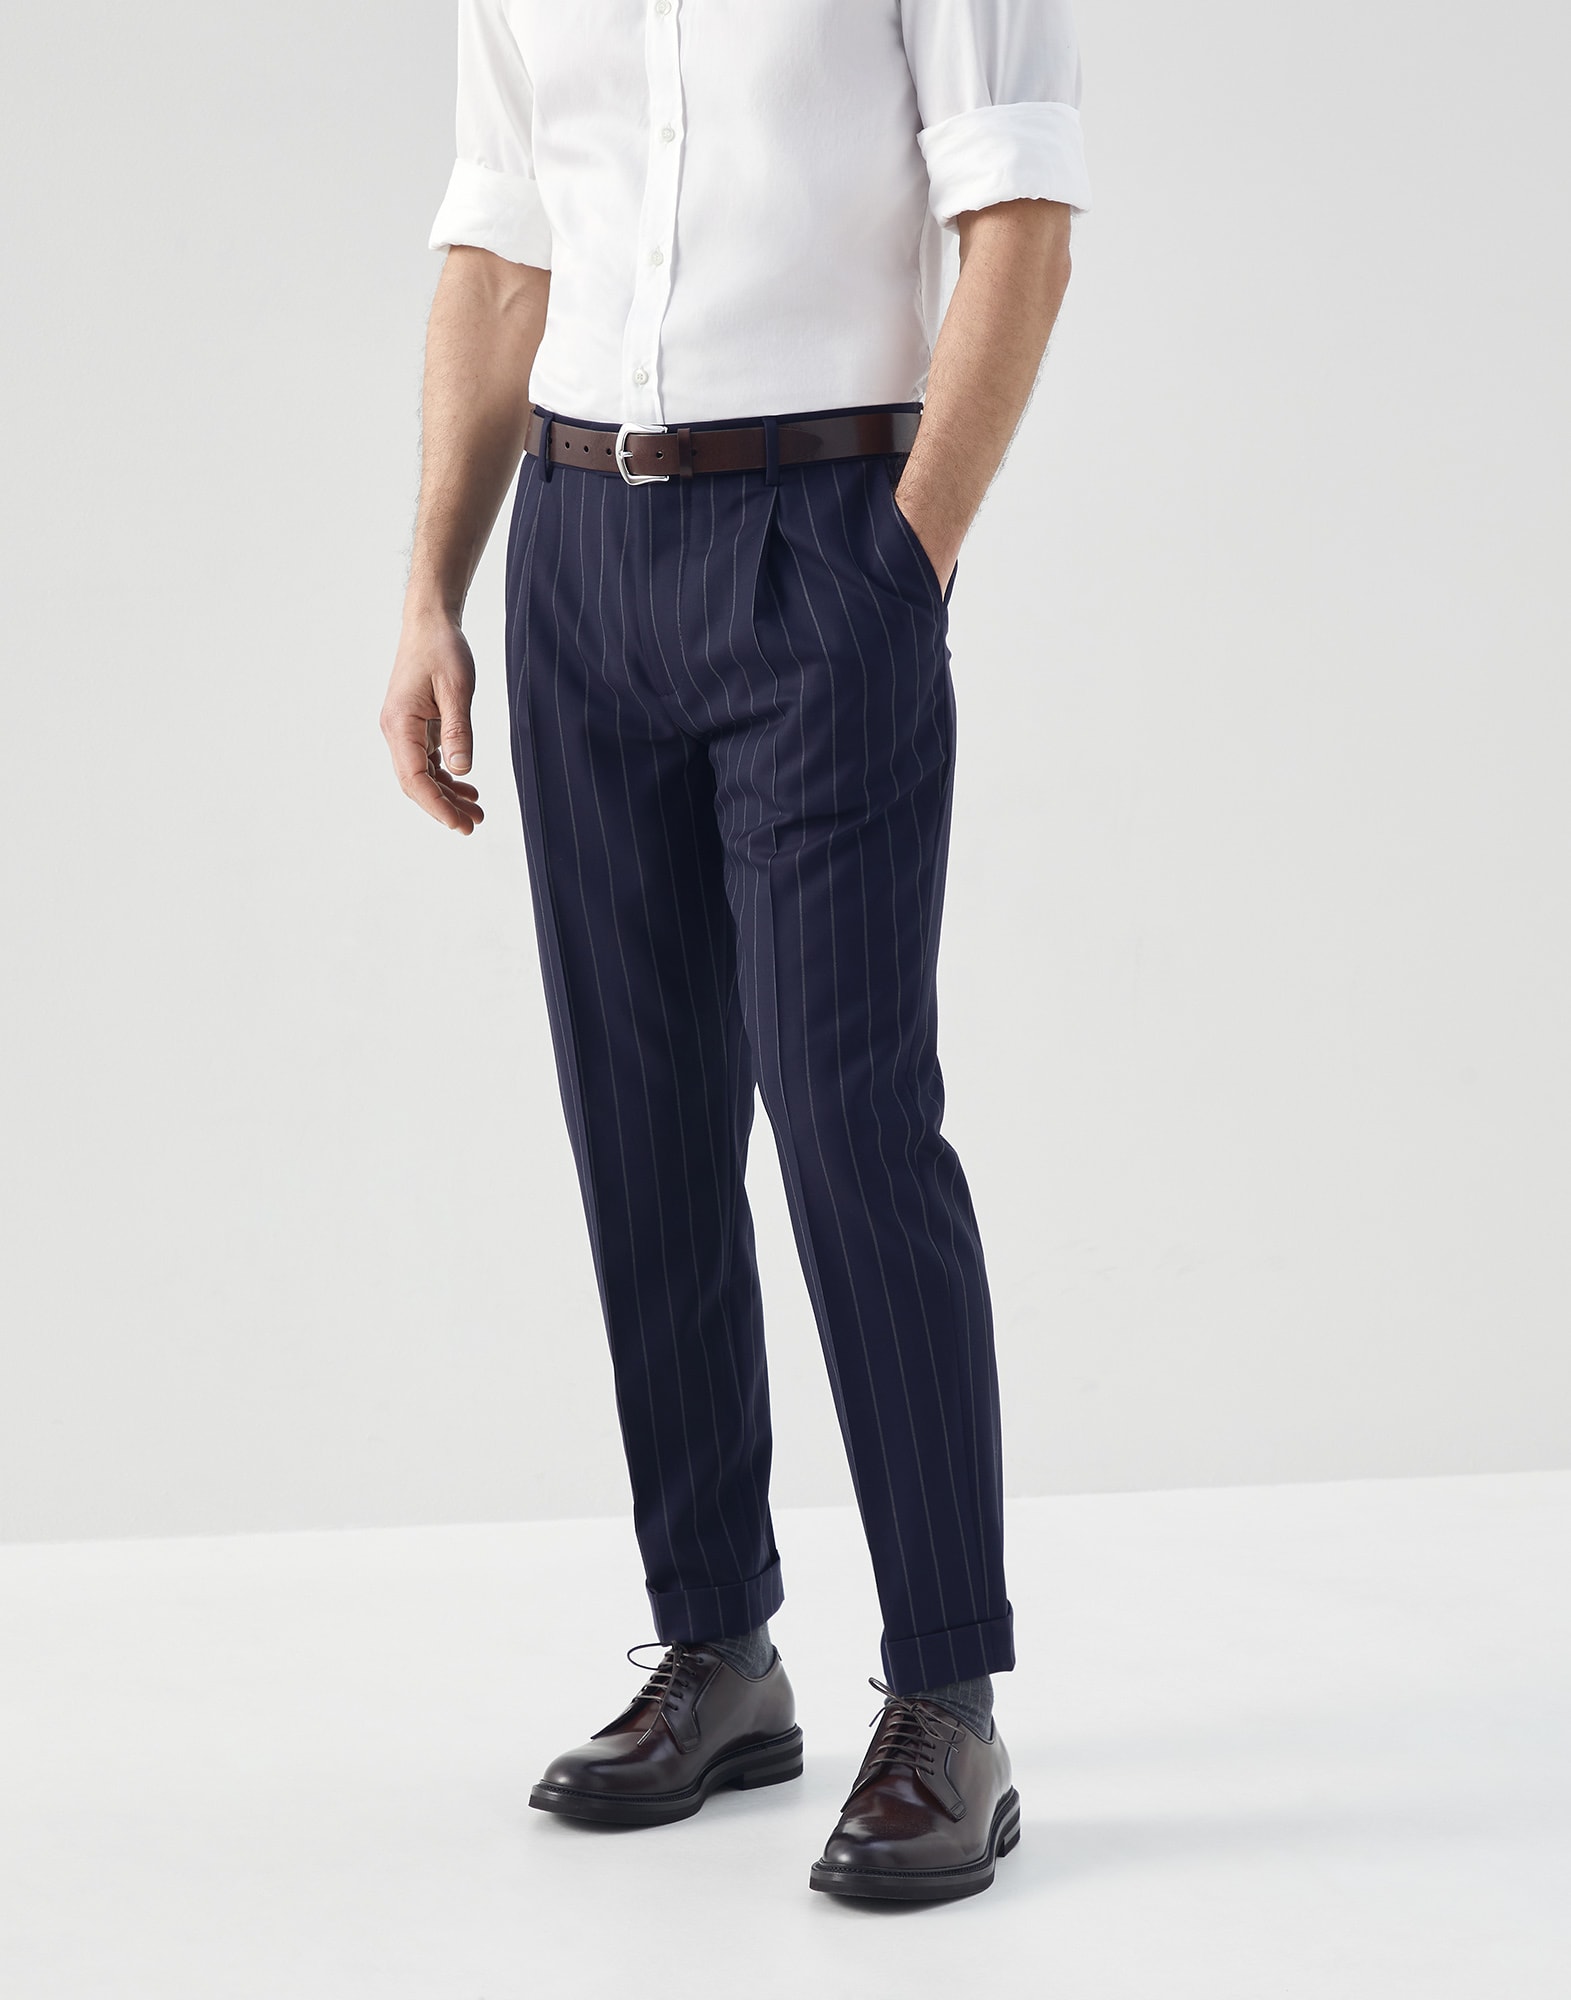 Black Striped Trousers for Men - Fursac A2AVAY-AA08-A011